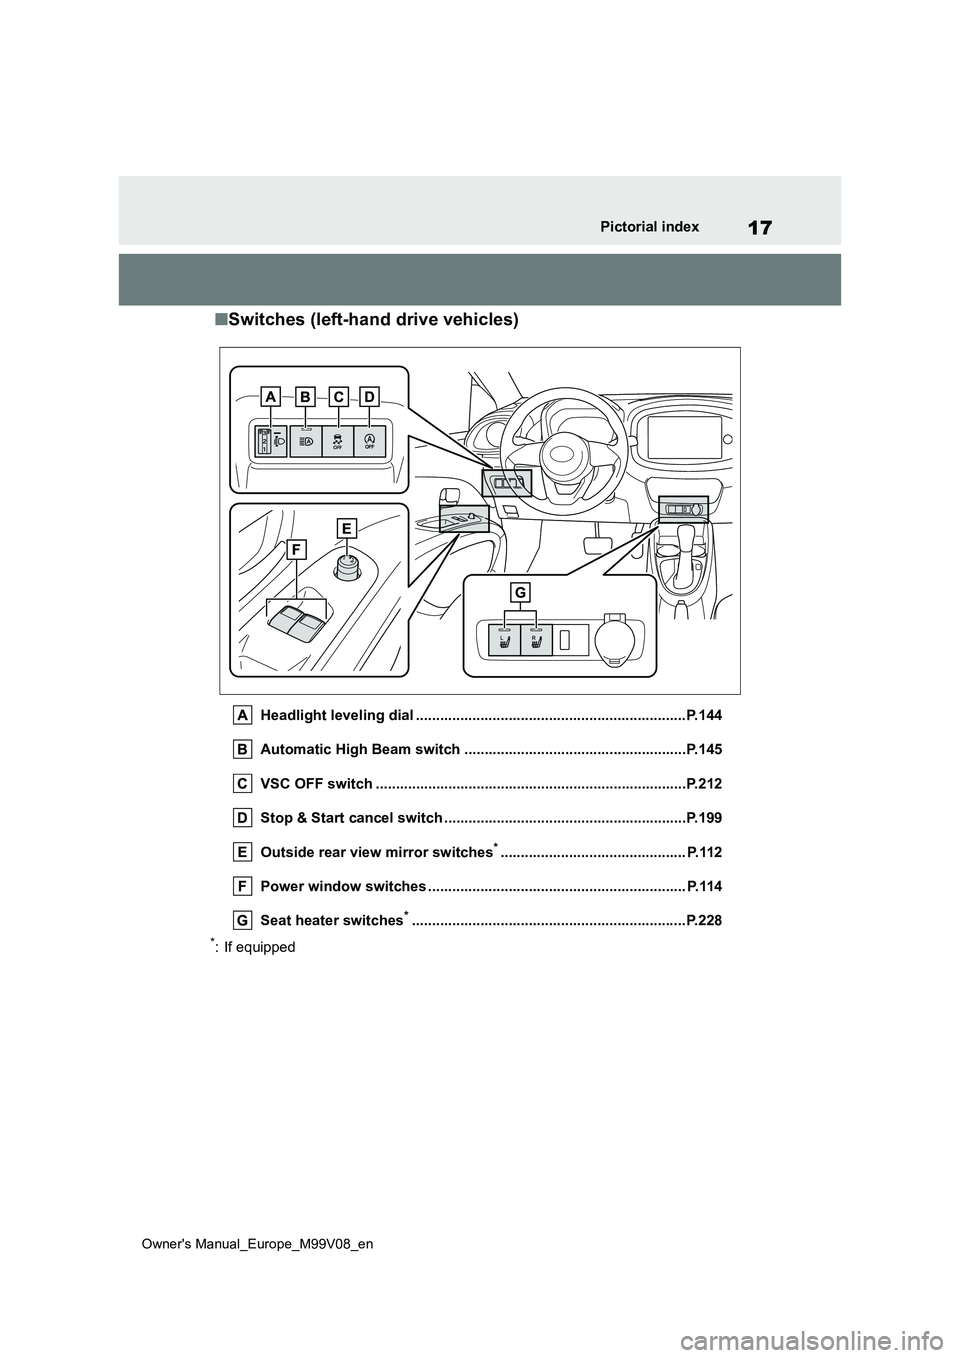 TOYOTA AYGO X 2022  Owners Manual (in English) 17
Owner's Manual_Europe_M99V08_en
Pictorial index
■Switches (left-hand drive vehicles)
Headlight leveling dial ...................................................................P.144 
Automati